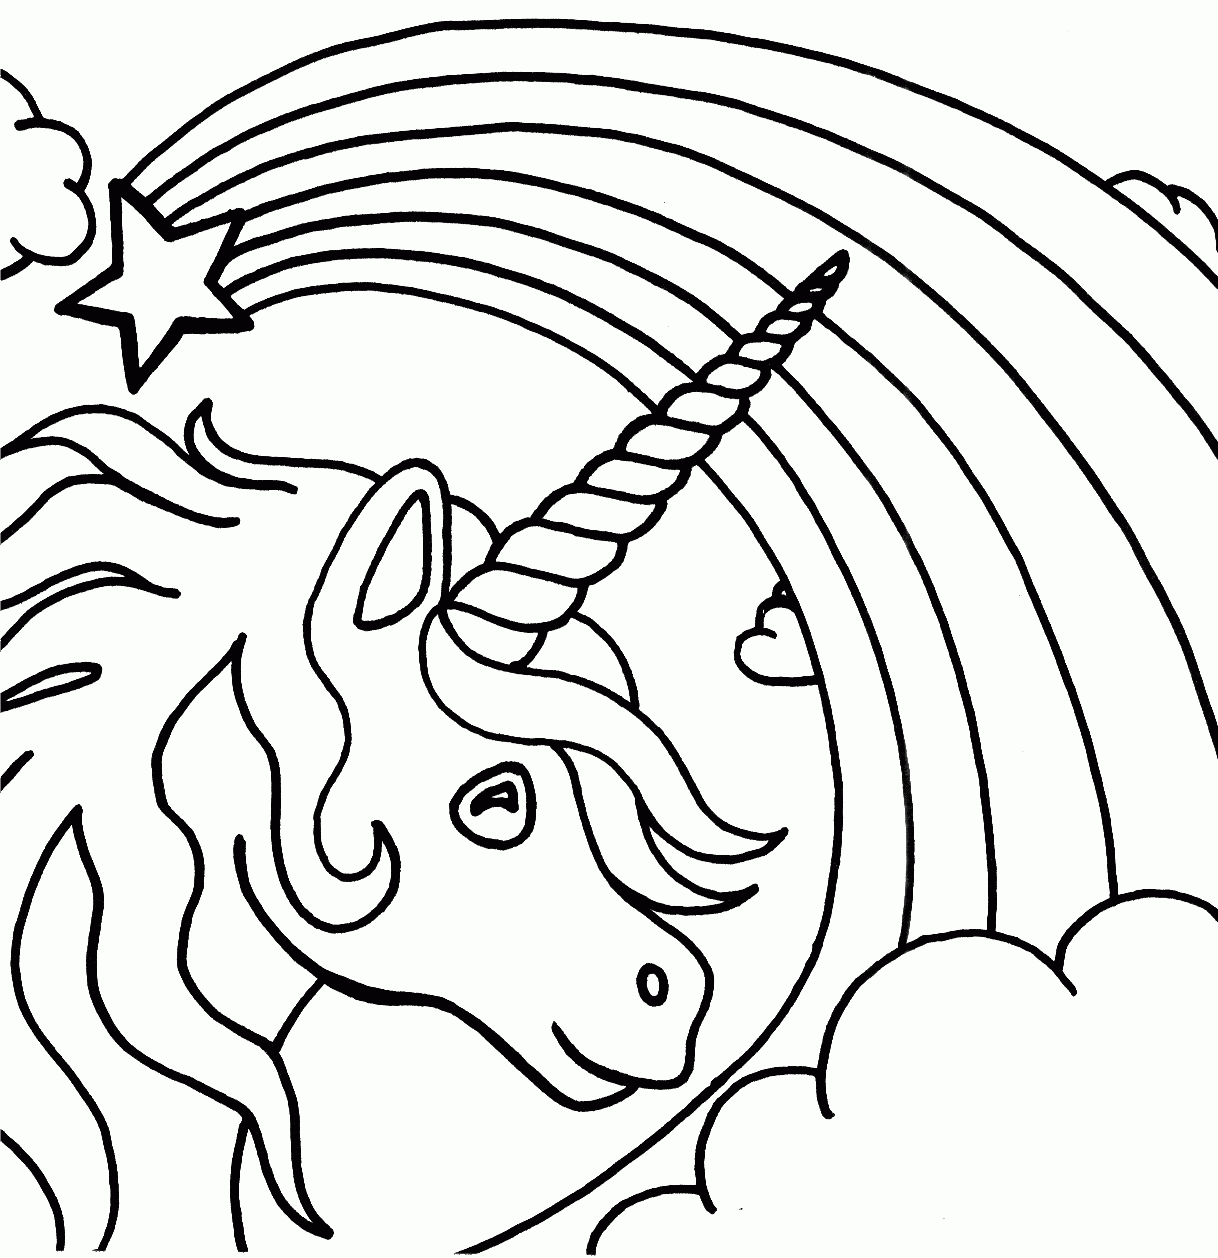 Printable Coloring Pages Designs for Pinterest